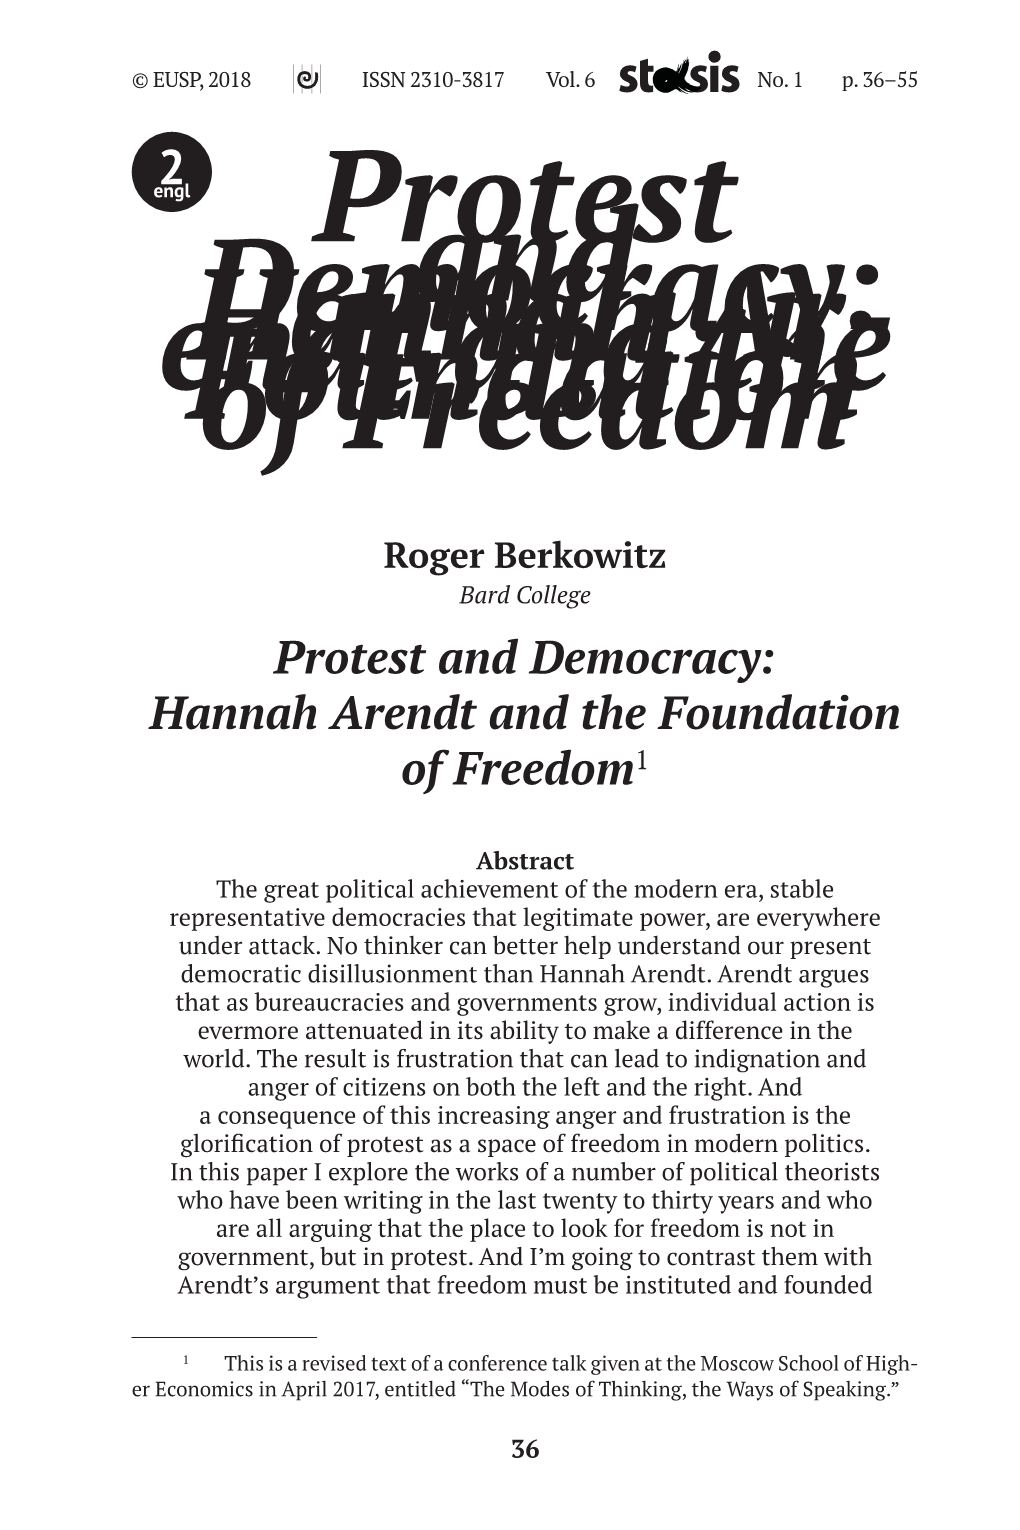 Protest and Democracy: Hannah Arendt and the Foundation of Freedom1